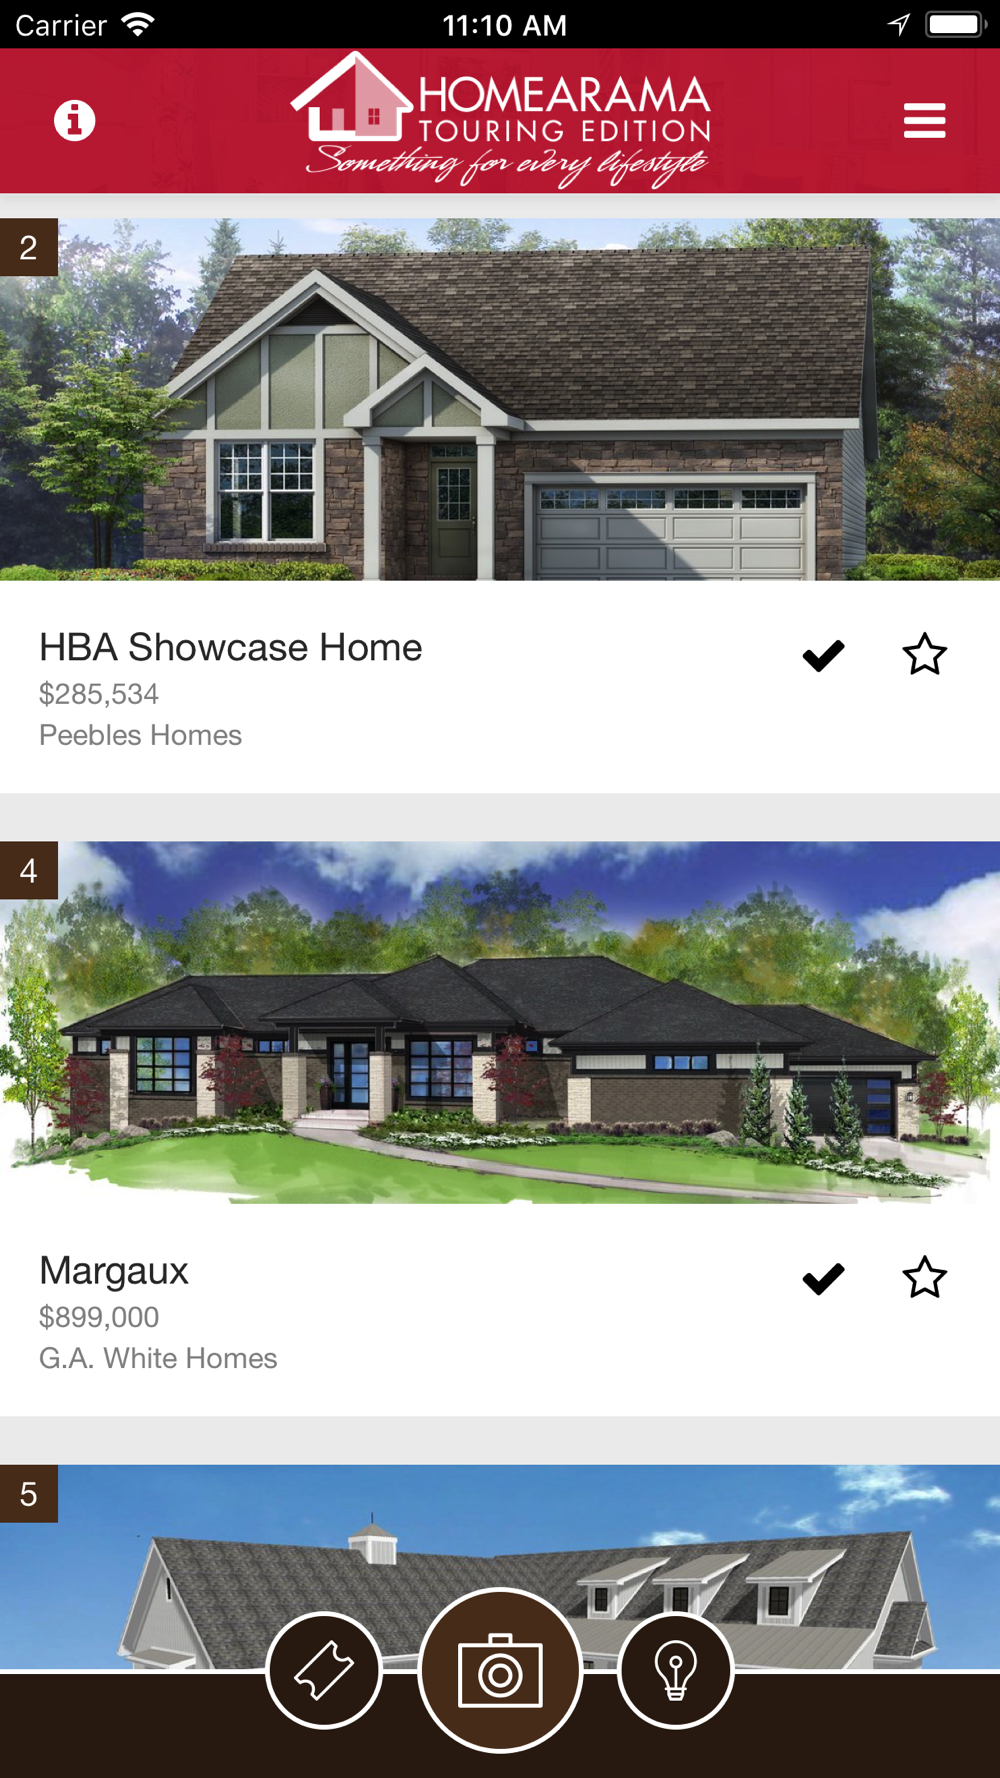 Dayton Homearama Free Download App for iPhone